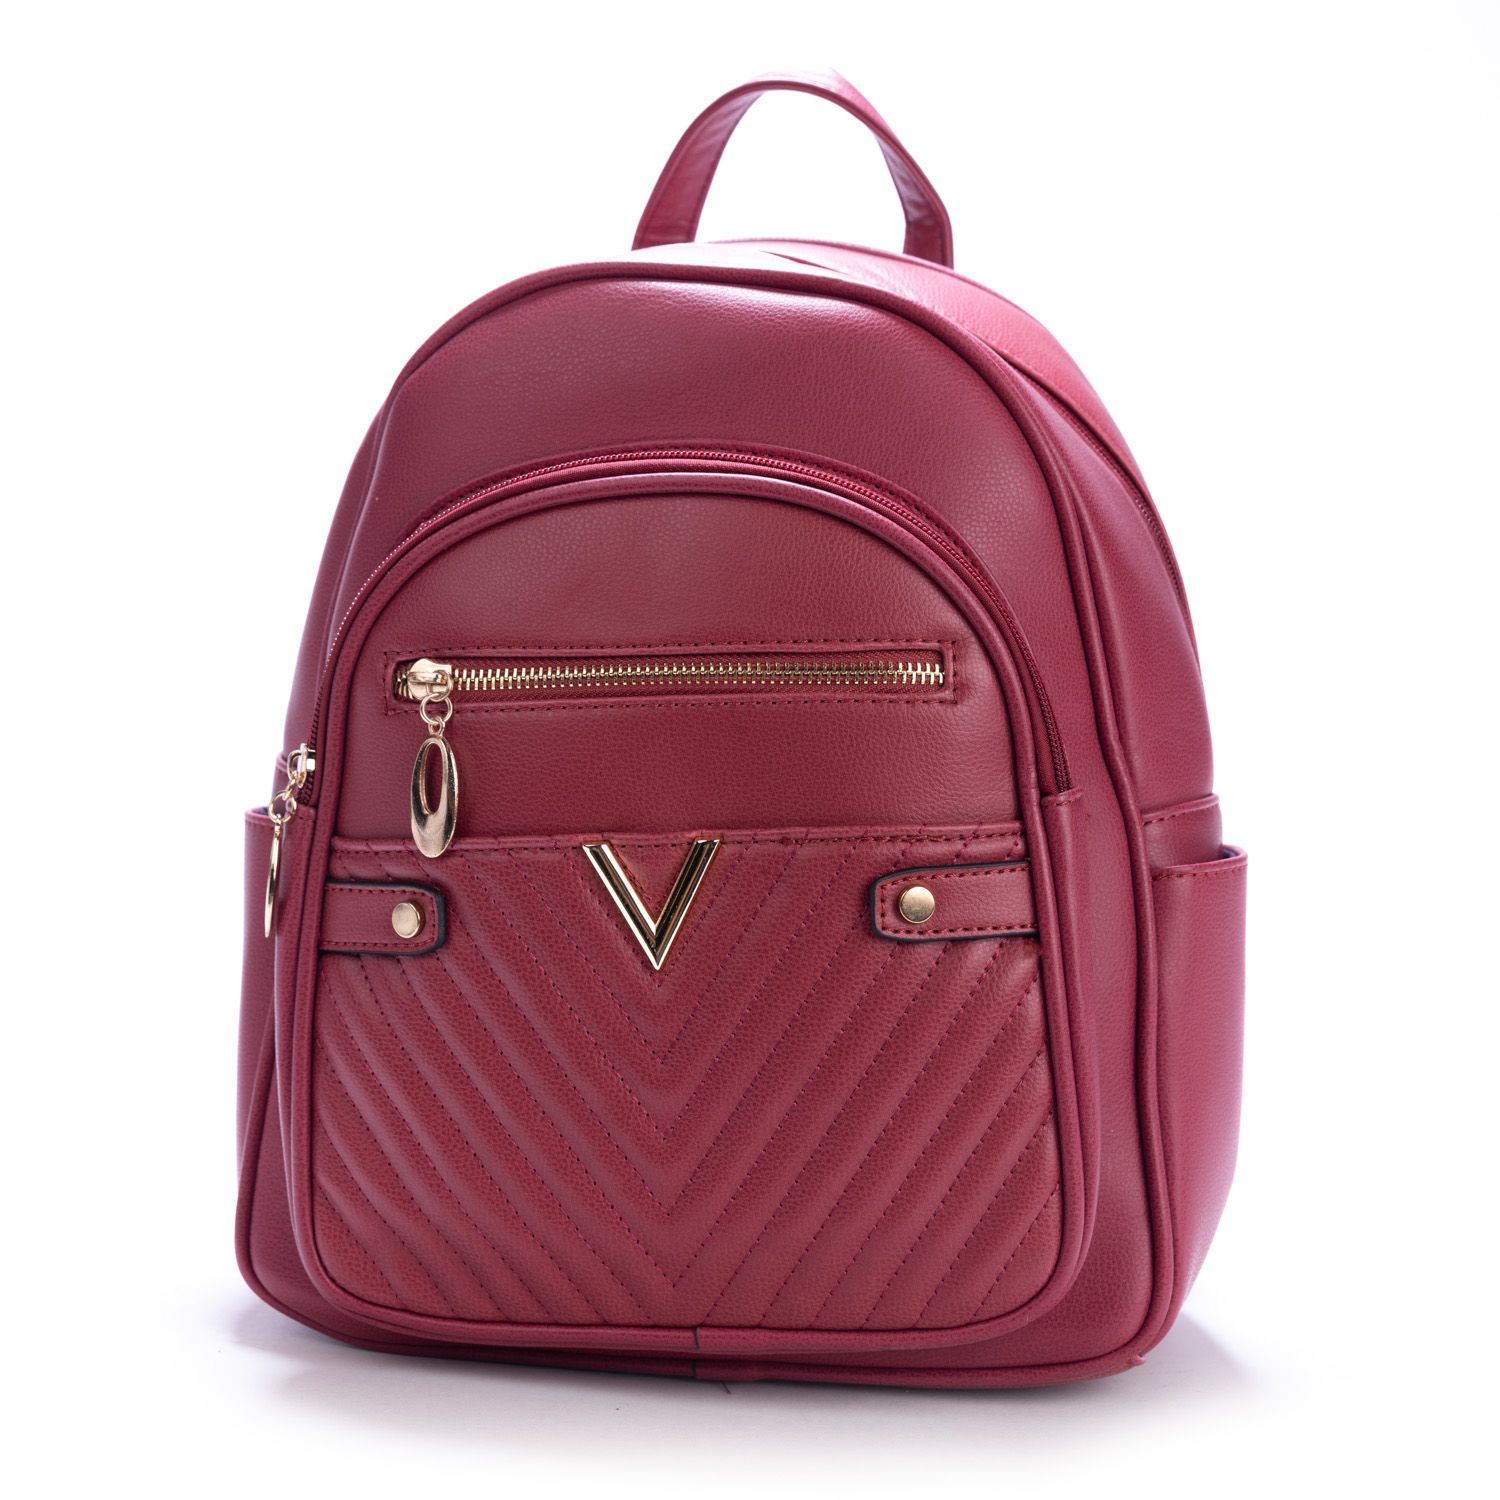 BACKPACK-1188-RED